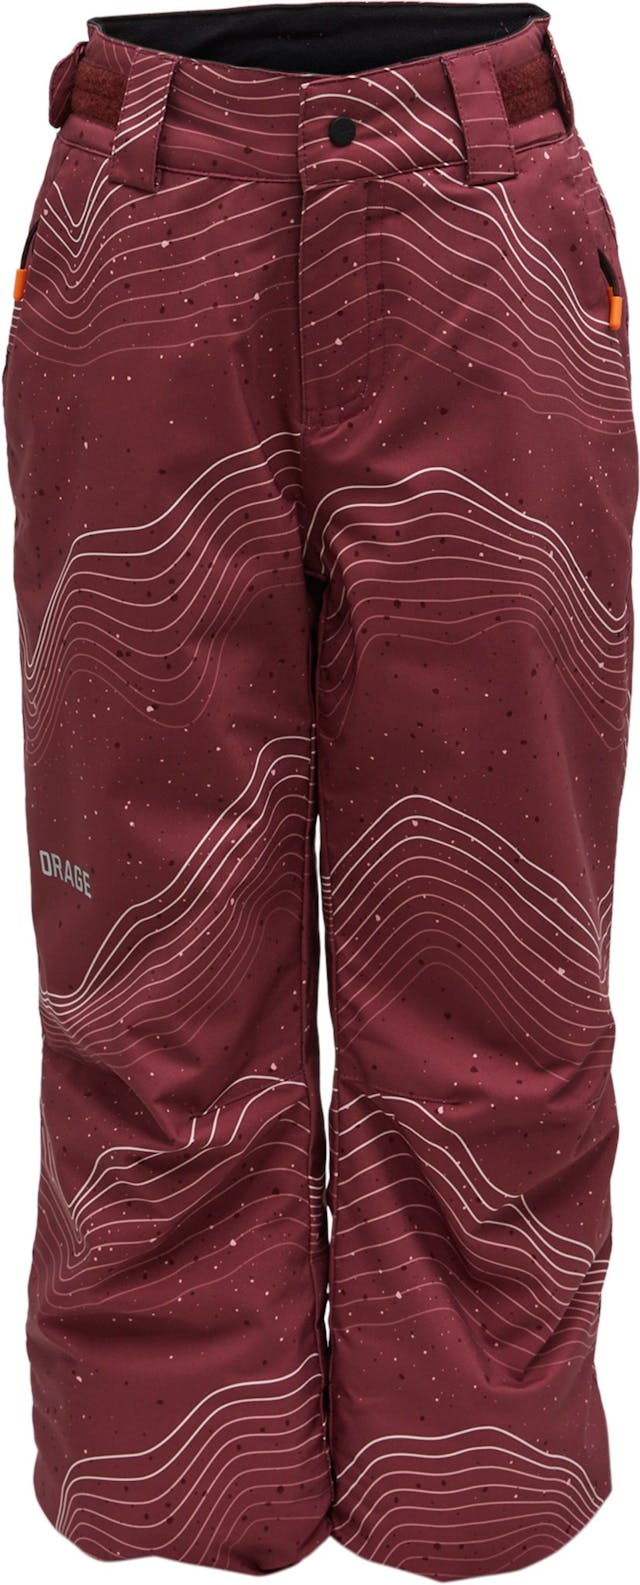 Product image for Comi Pants - Girls